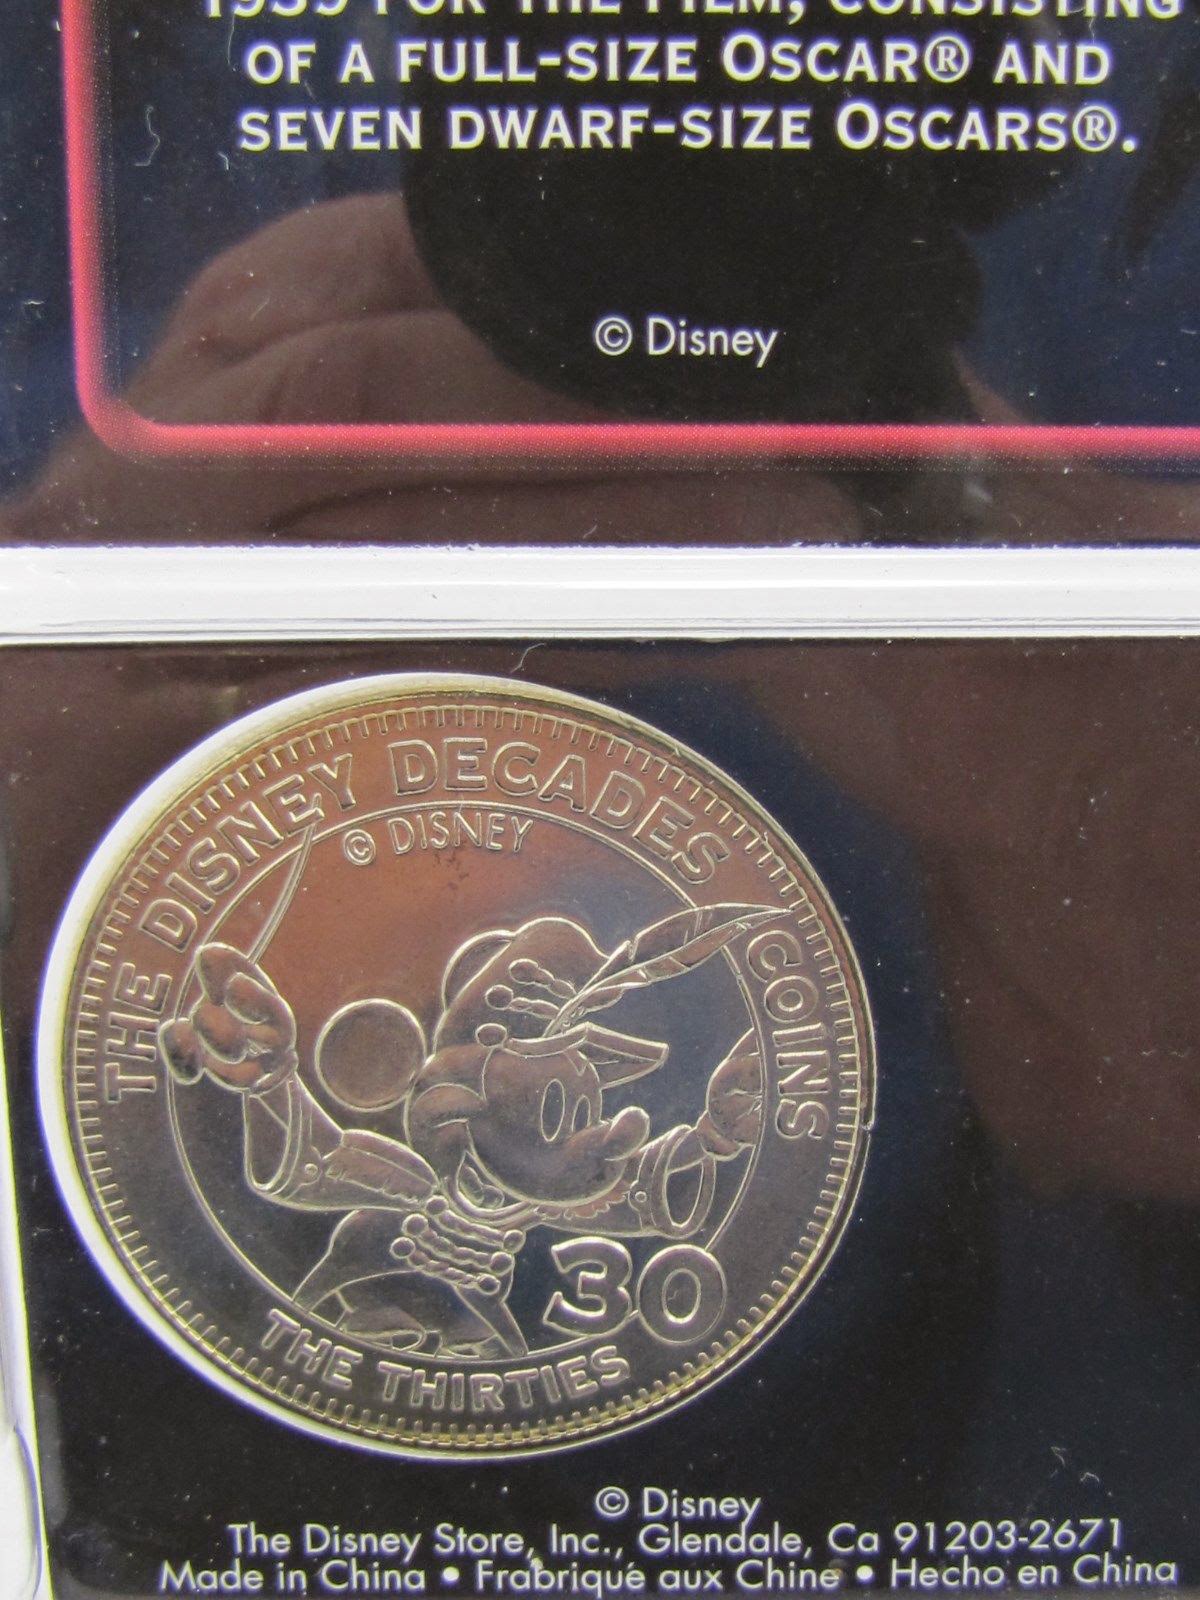 Filmic Light - Snow White Archive: The Disney Decades Coin